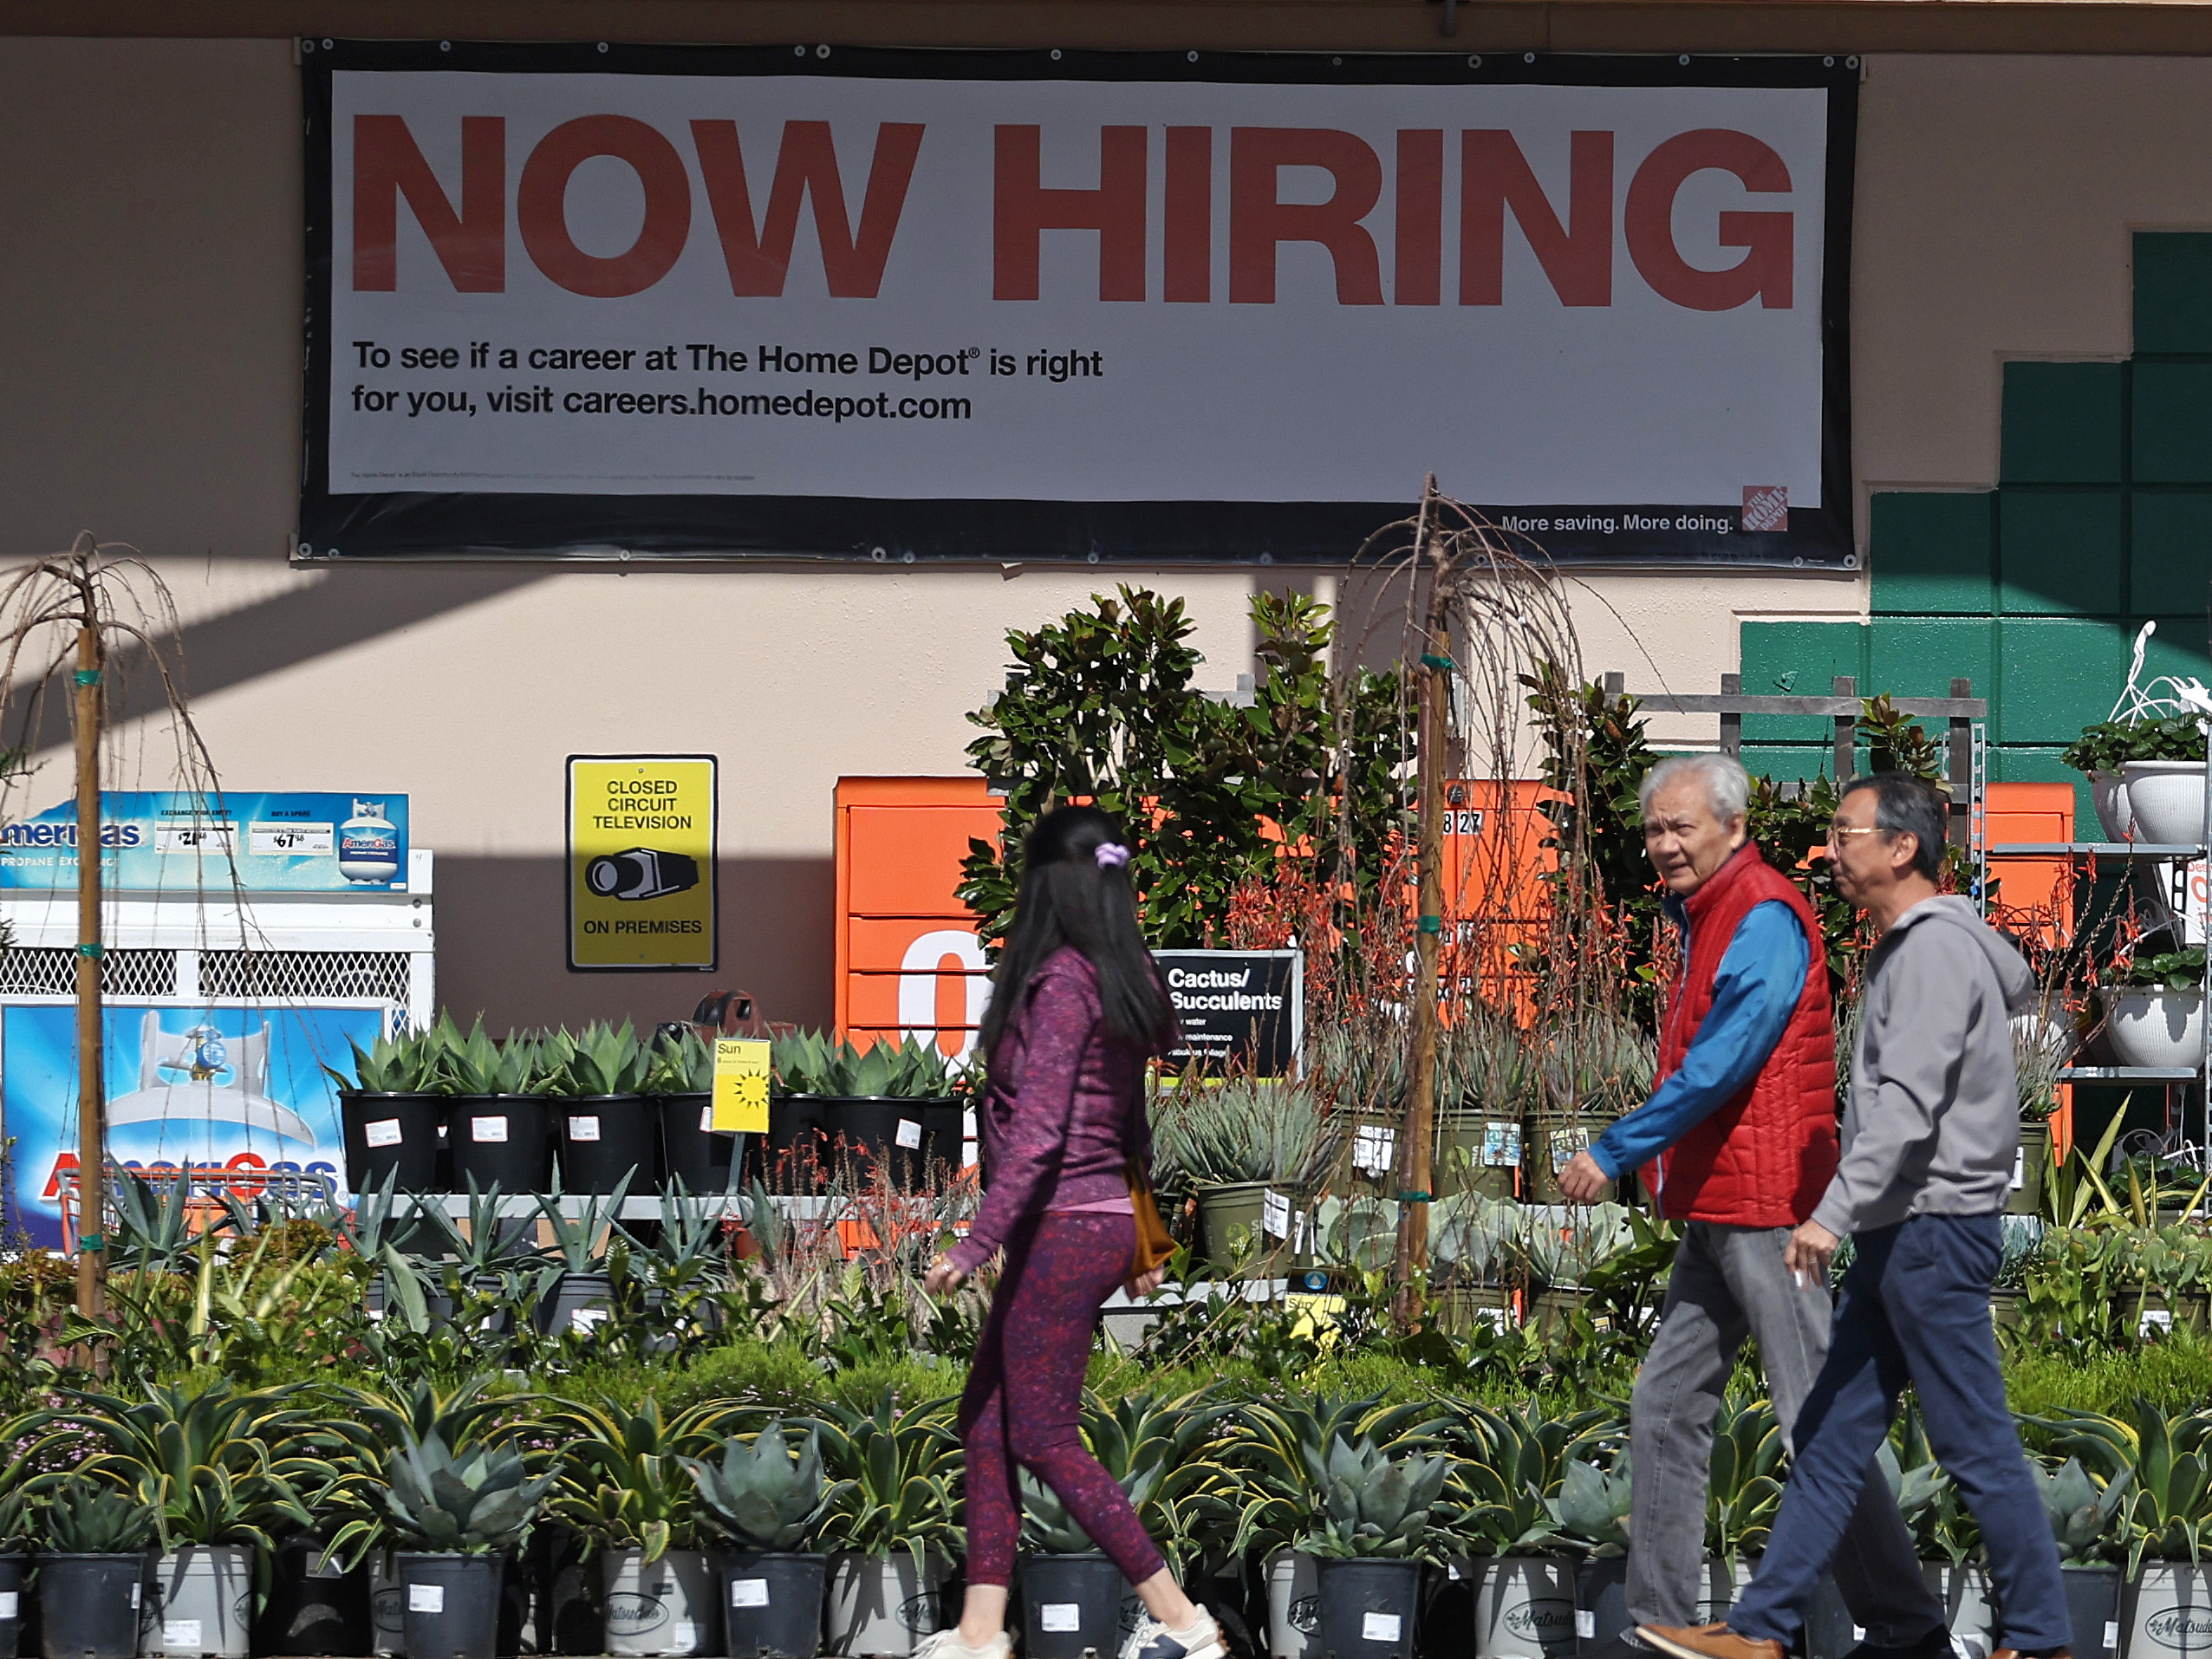 Hiring accelerated in the U.S. in March, adding 303,000 jobs, according to a report from the Bureau of Labor Statistics. The unemployment rate dipped to 3.8%, staying under 4% for more than two full years. People walk past a Home Depot in San Rafael, Calif.